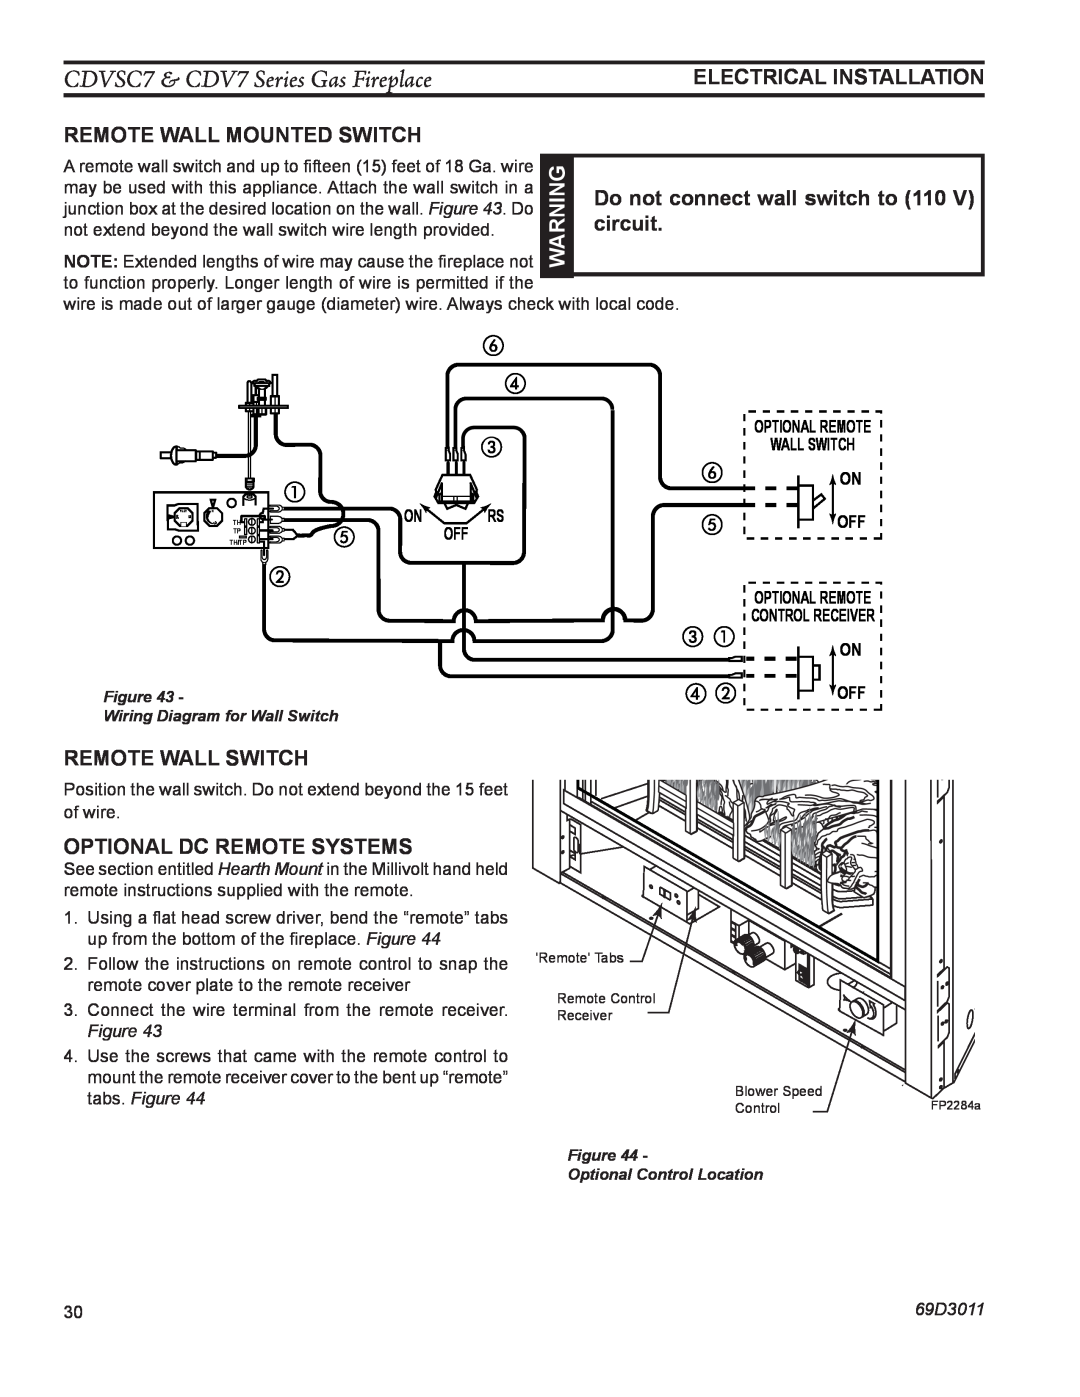 Monessen Hearth CDV7 Electrical installation, Remote Wall mounted Switch, Do not connect wall switch to, circuit, 69D3011 